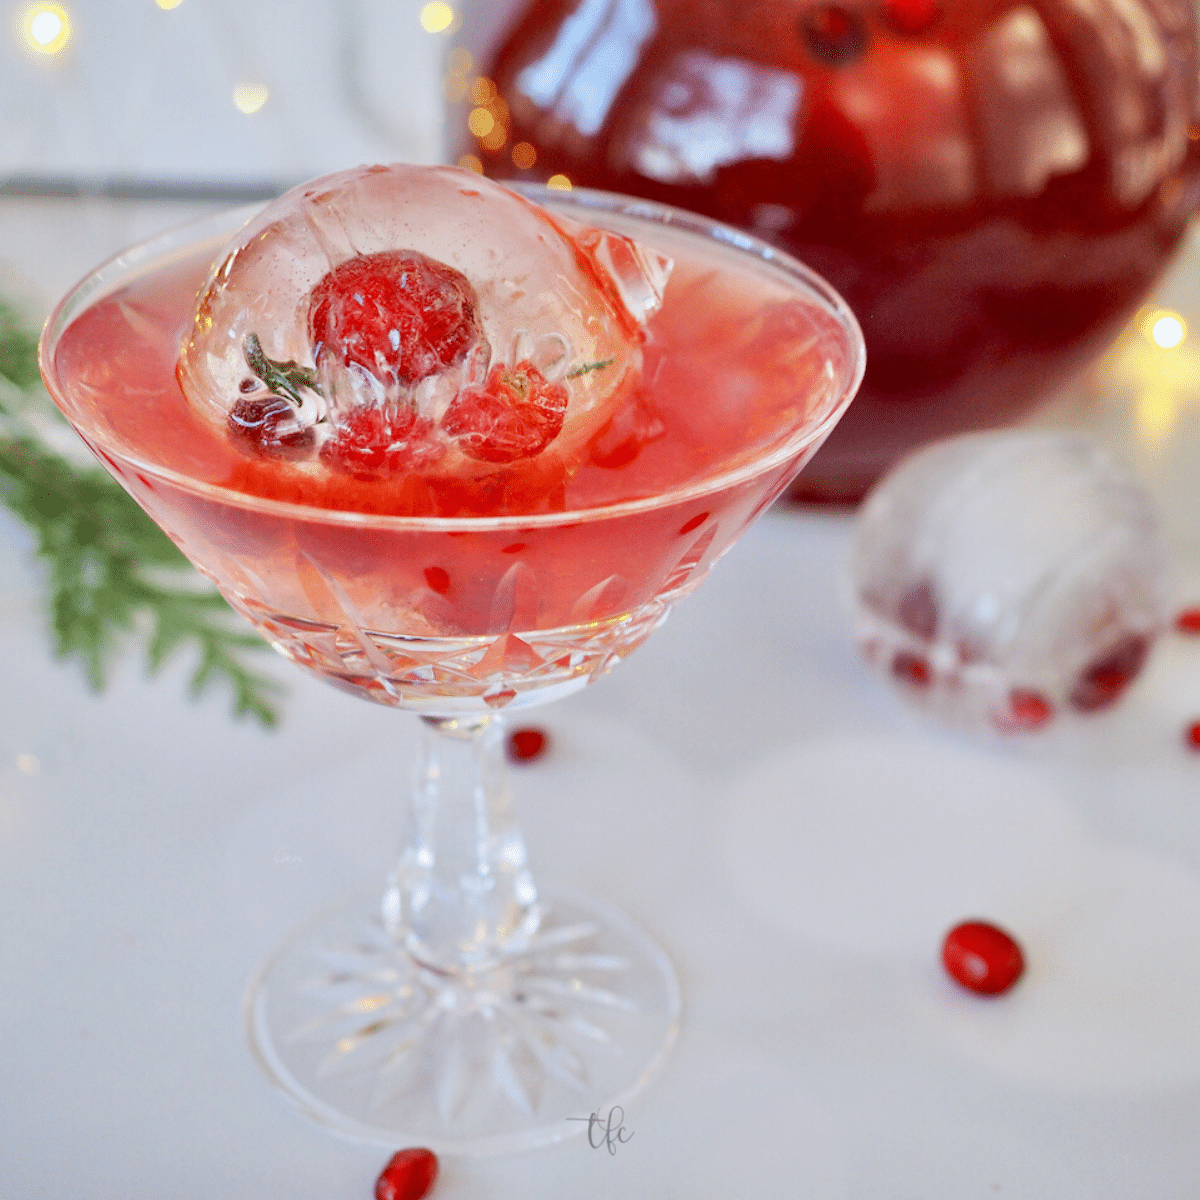 Pomegranate Punch in pretty glass with ornament ice ball.